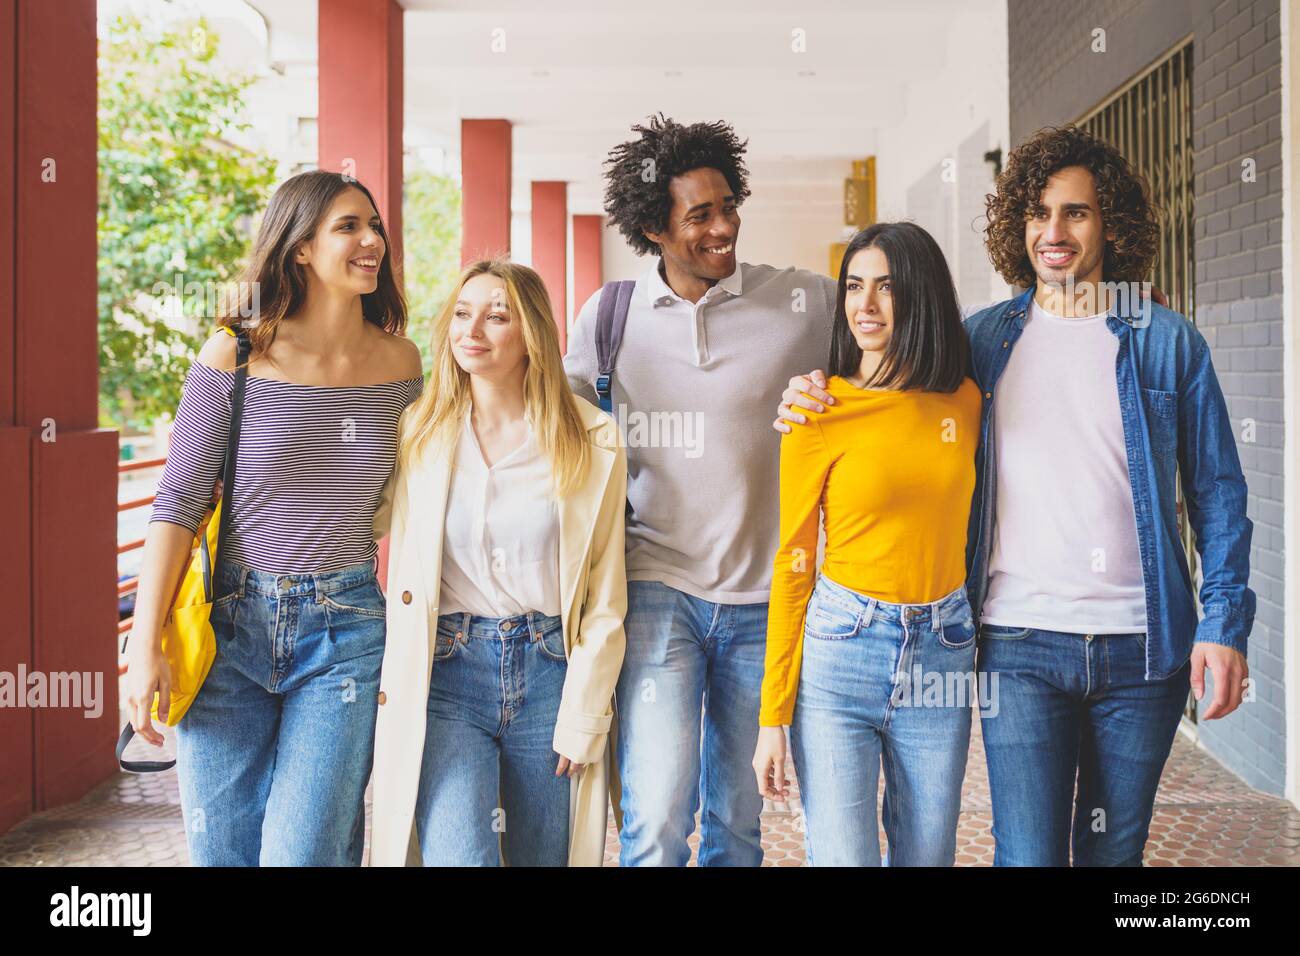 Multi-ethnic group of students walking together on the street. Stock Photo